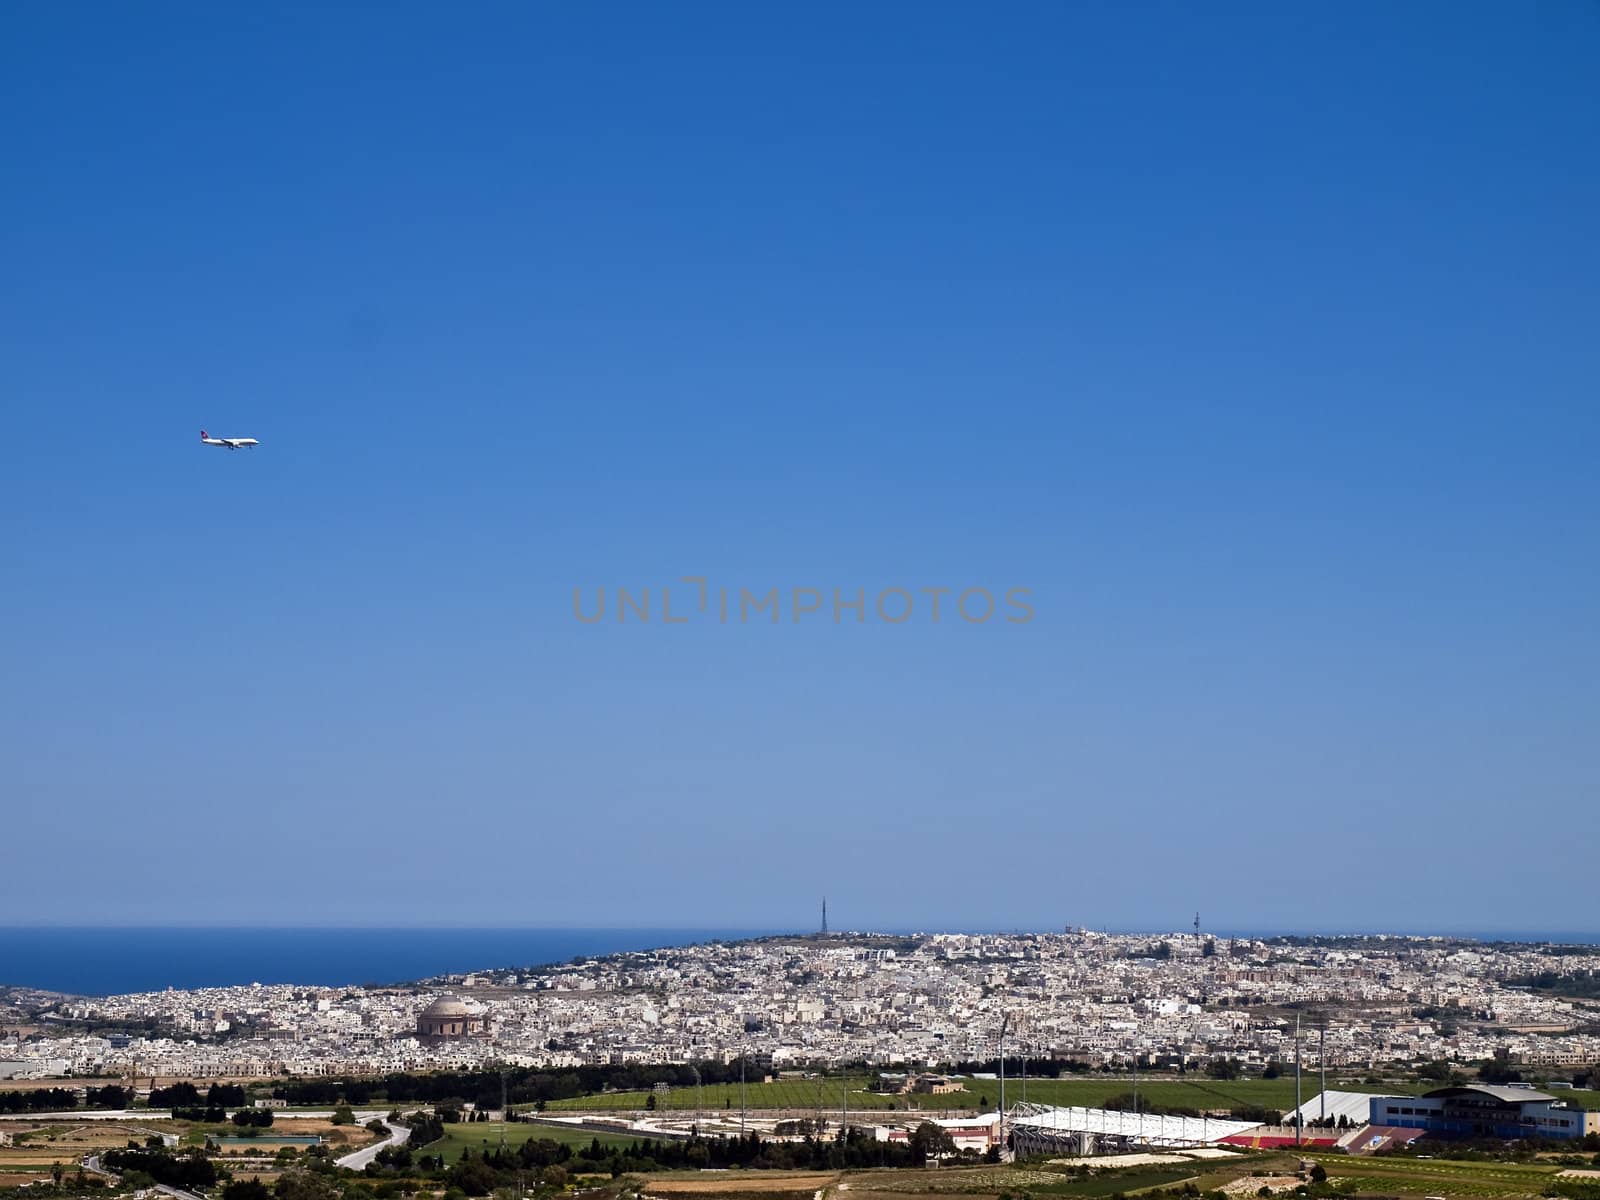 View of Malta as seen from Mdina bastions with plane on final descent to Luqa Airport